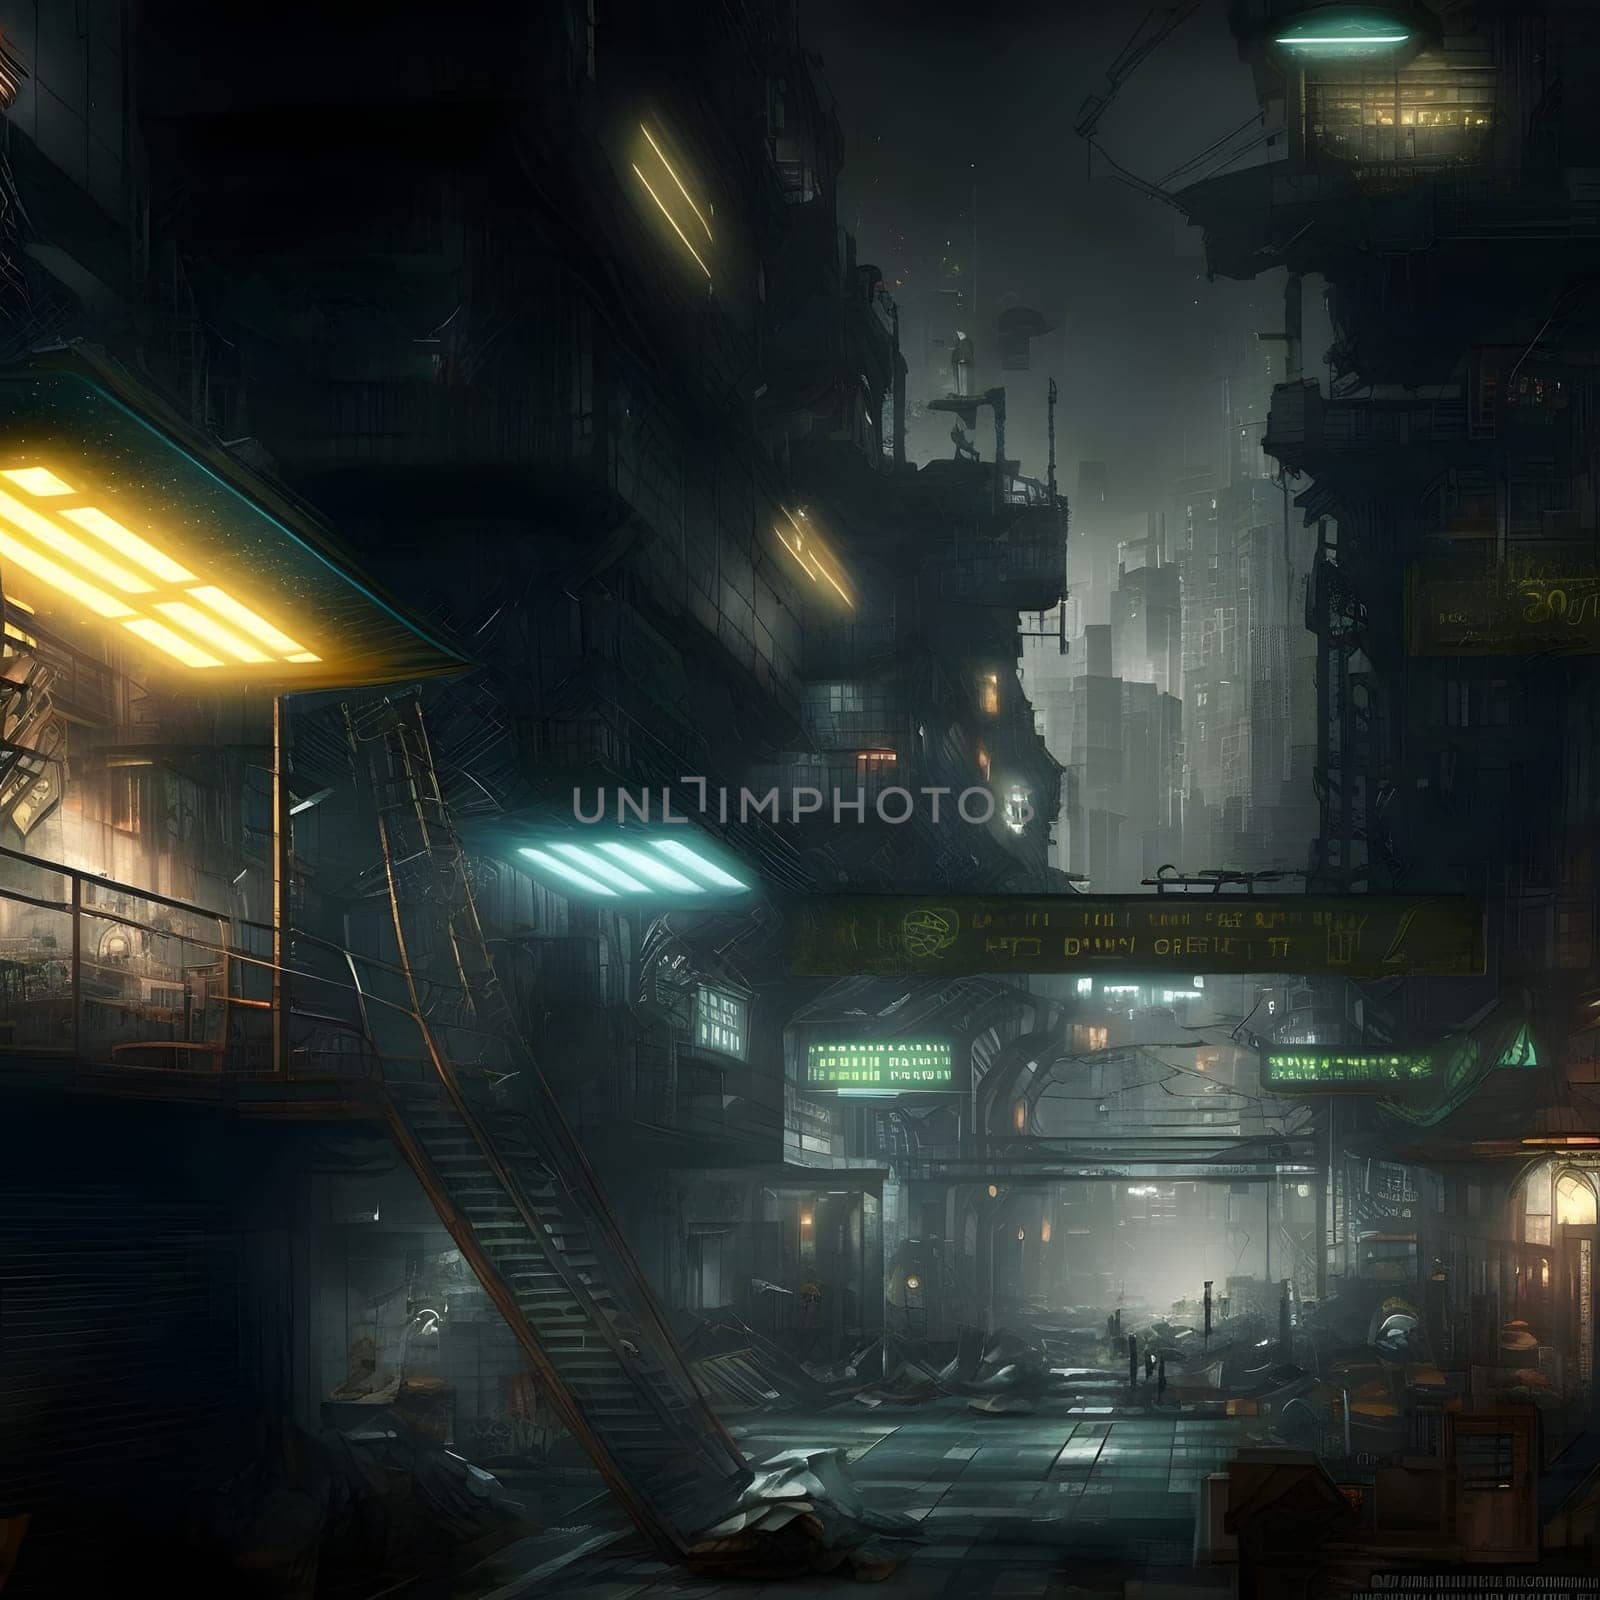 grim dystopian futuristic city street at foggy night, neural network generated art. Digitally generated image. Not based on any actual person, scene or pattern.